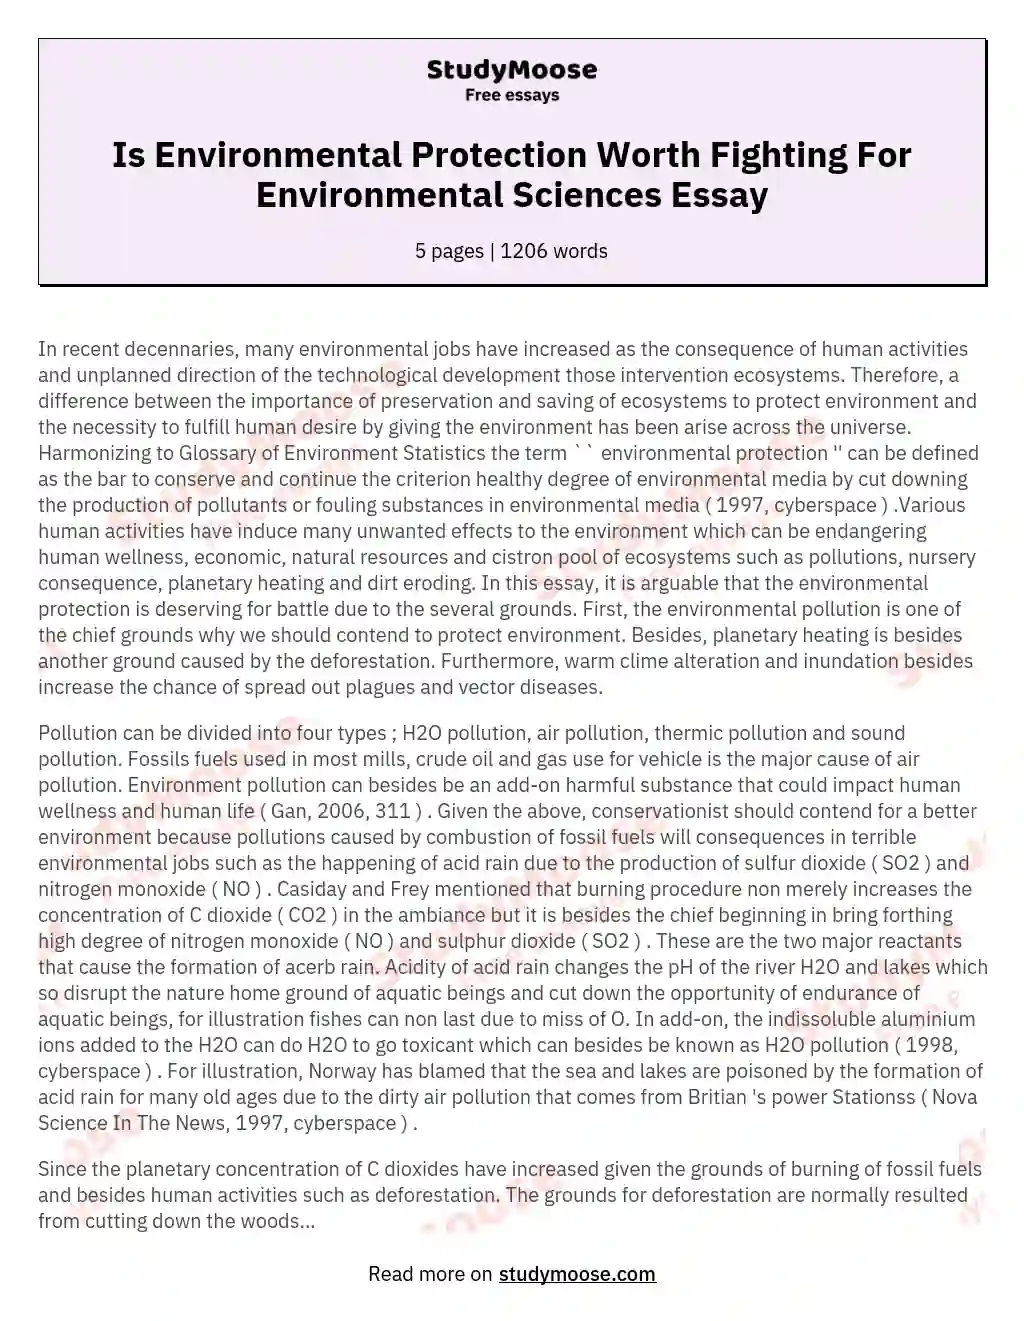 Is Environmental Protection Worth Fighting For Environmental Sciences Essay